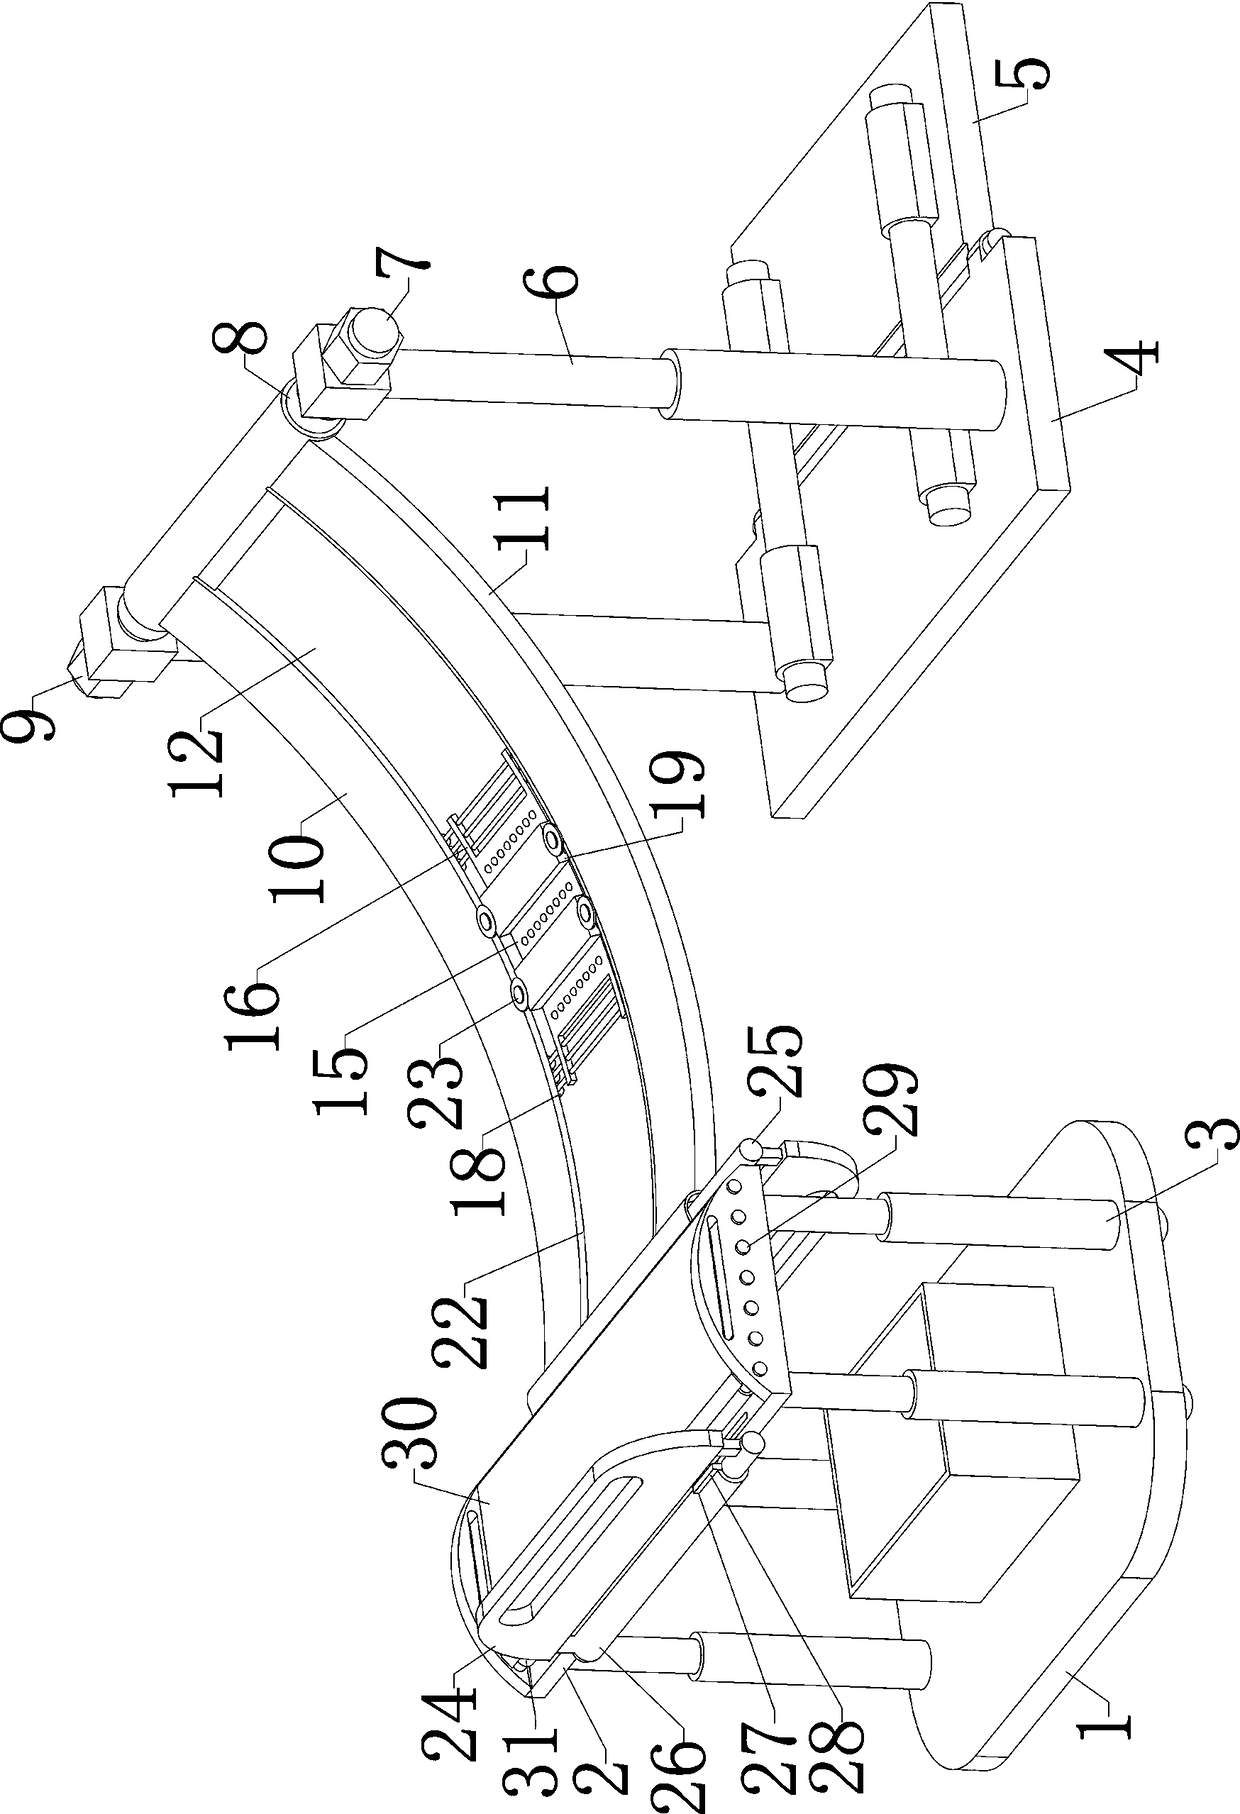 Transfer bed applicable to medical obstetric operations and predelivery